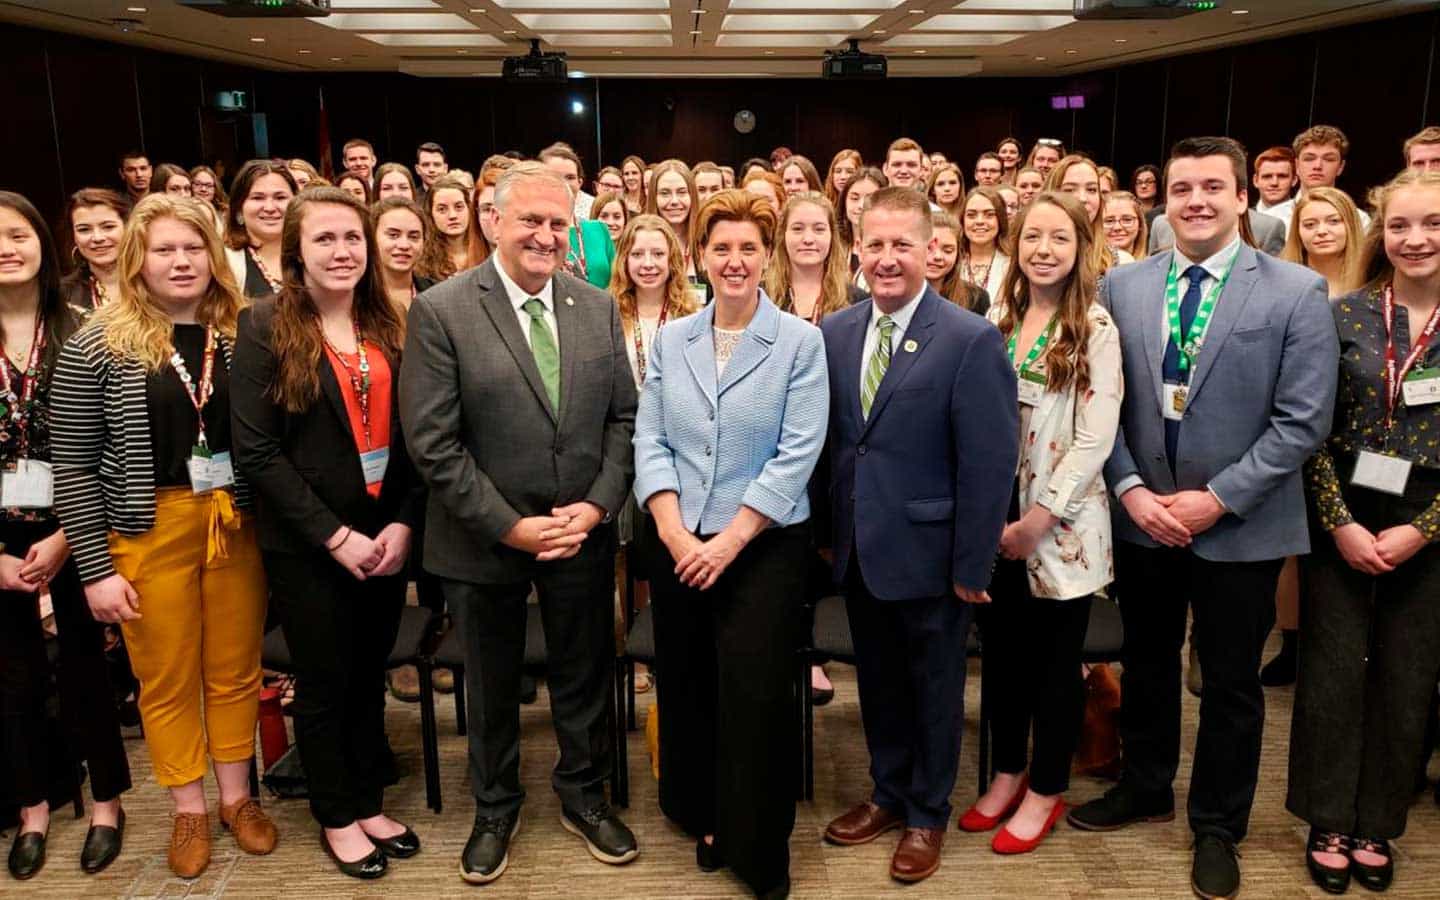 4-H Canada receives $3 million from feds in support of youth development